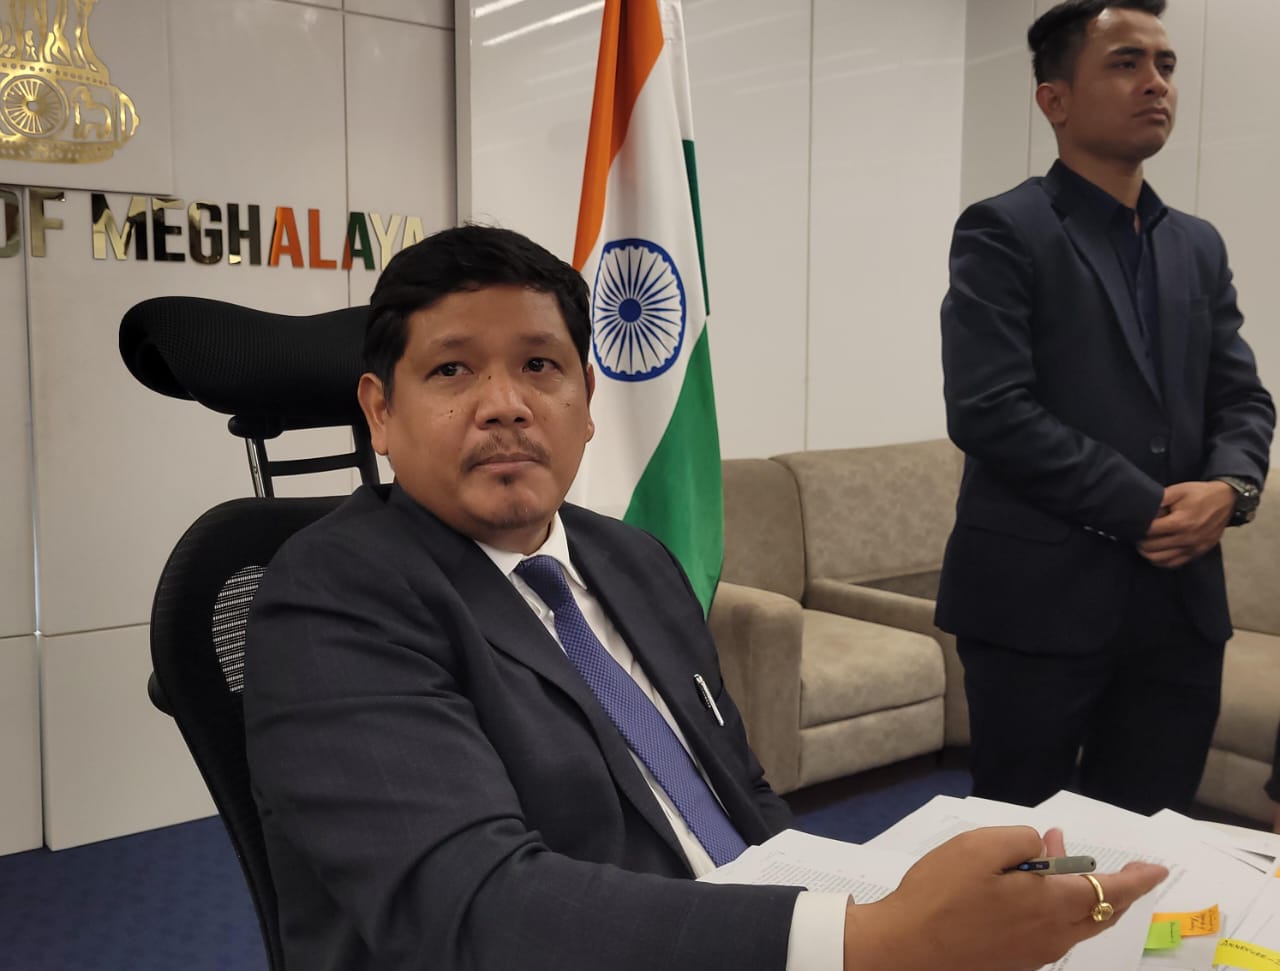 Meghalaya CM welcomes entre’s decision to reserve 33 percent of seats for women in Parliament and State Assemblies